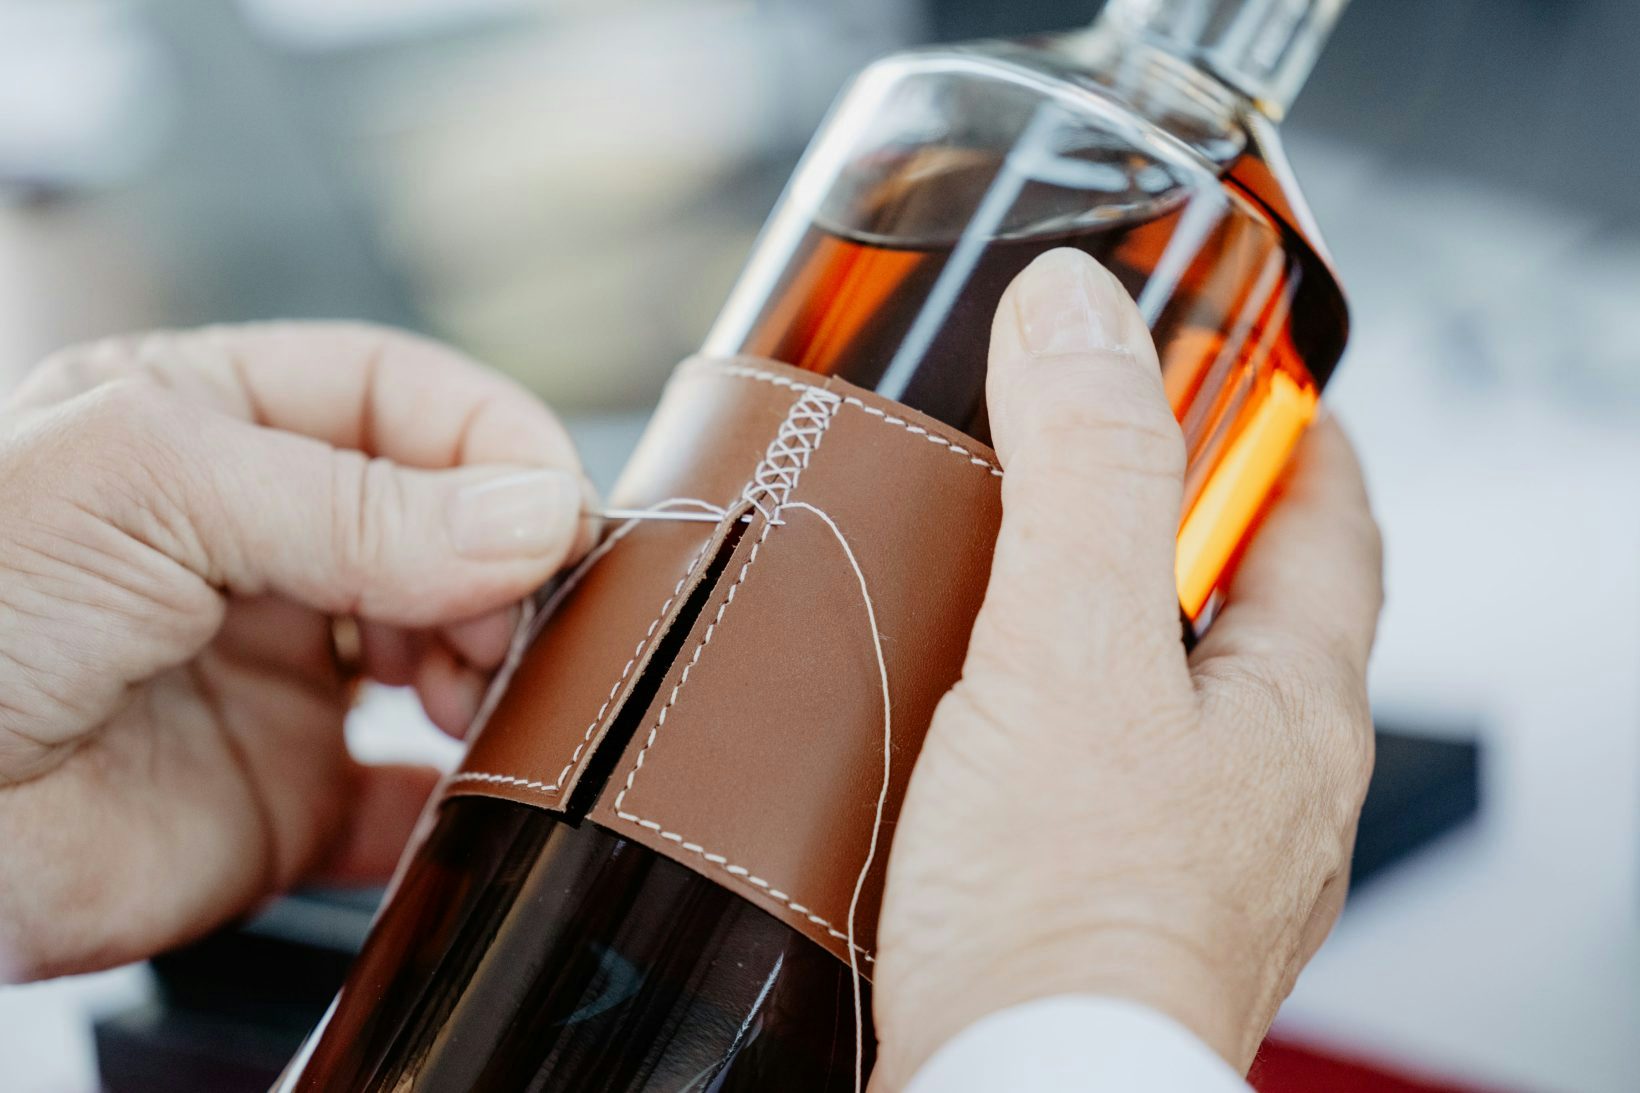 “The ambition is to establish Camus cognacs as a prominent luxury brand”